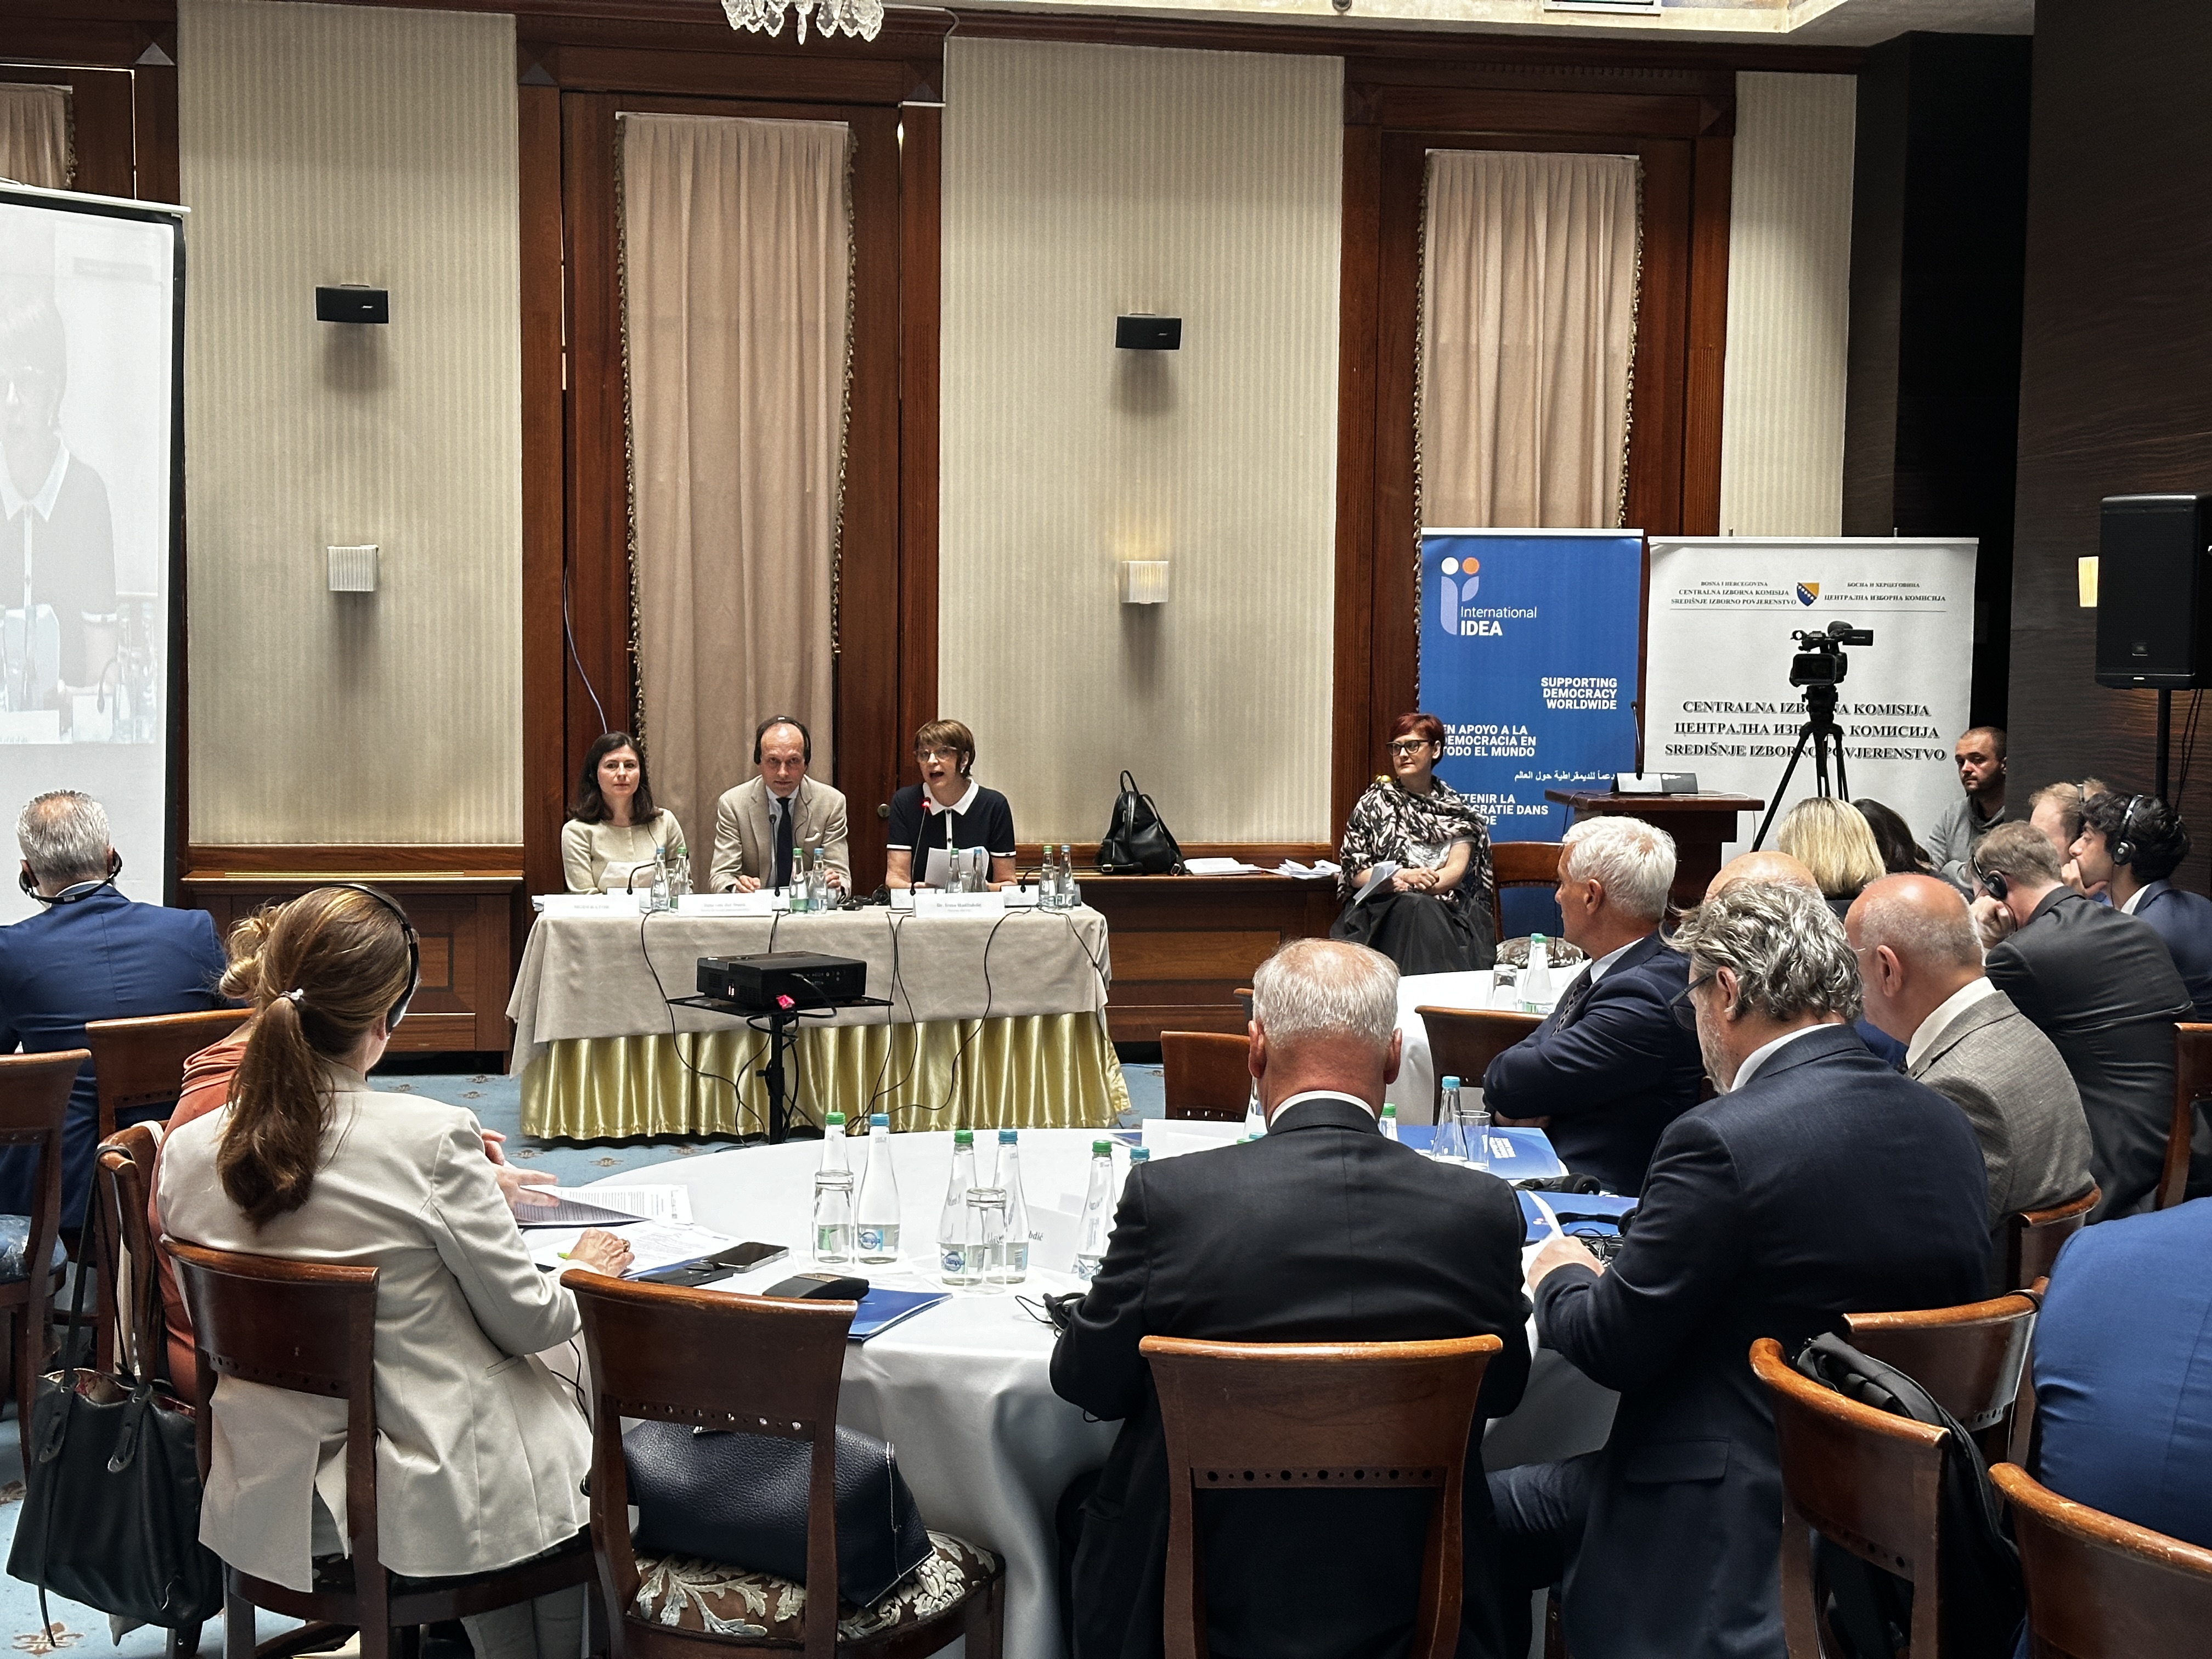 Meeting in Sarajevo, Election Management Bodies (EMBs) from the Western Balkans, alongside esteemed academics, and representatives from civil society organizations exchanged views on how to utilize Artificial Intelligence to boost the integrity and public trust in elections.  